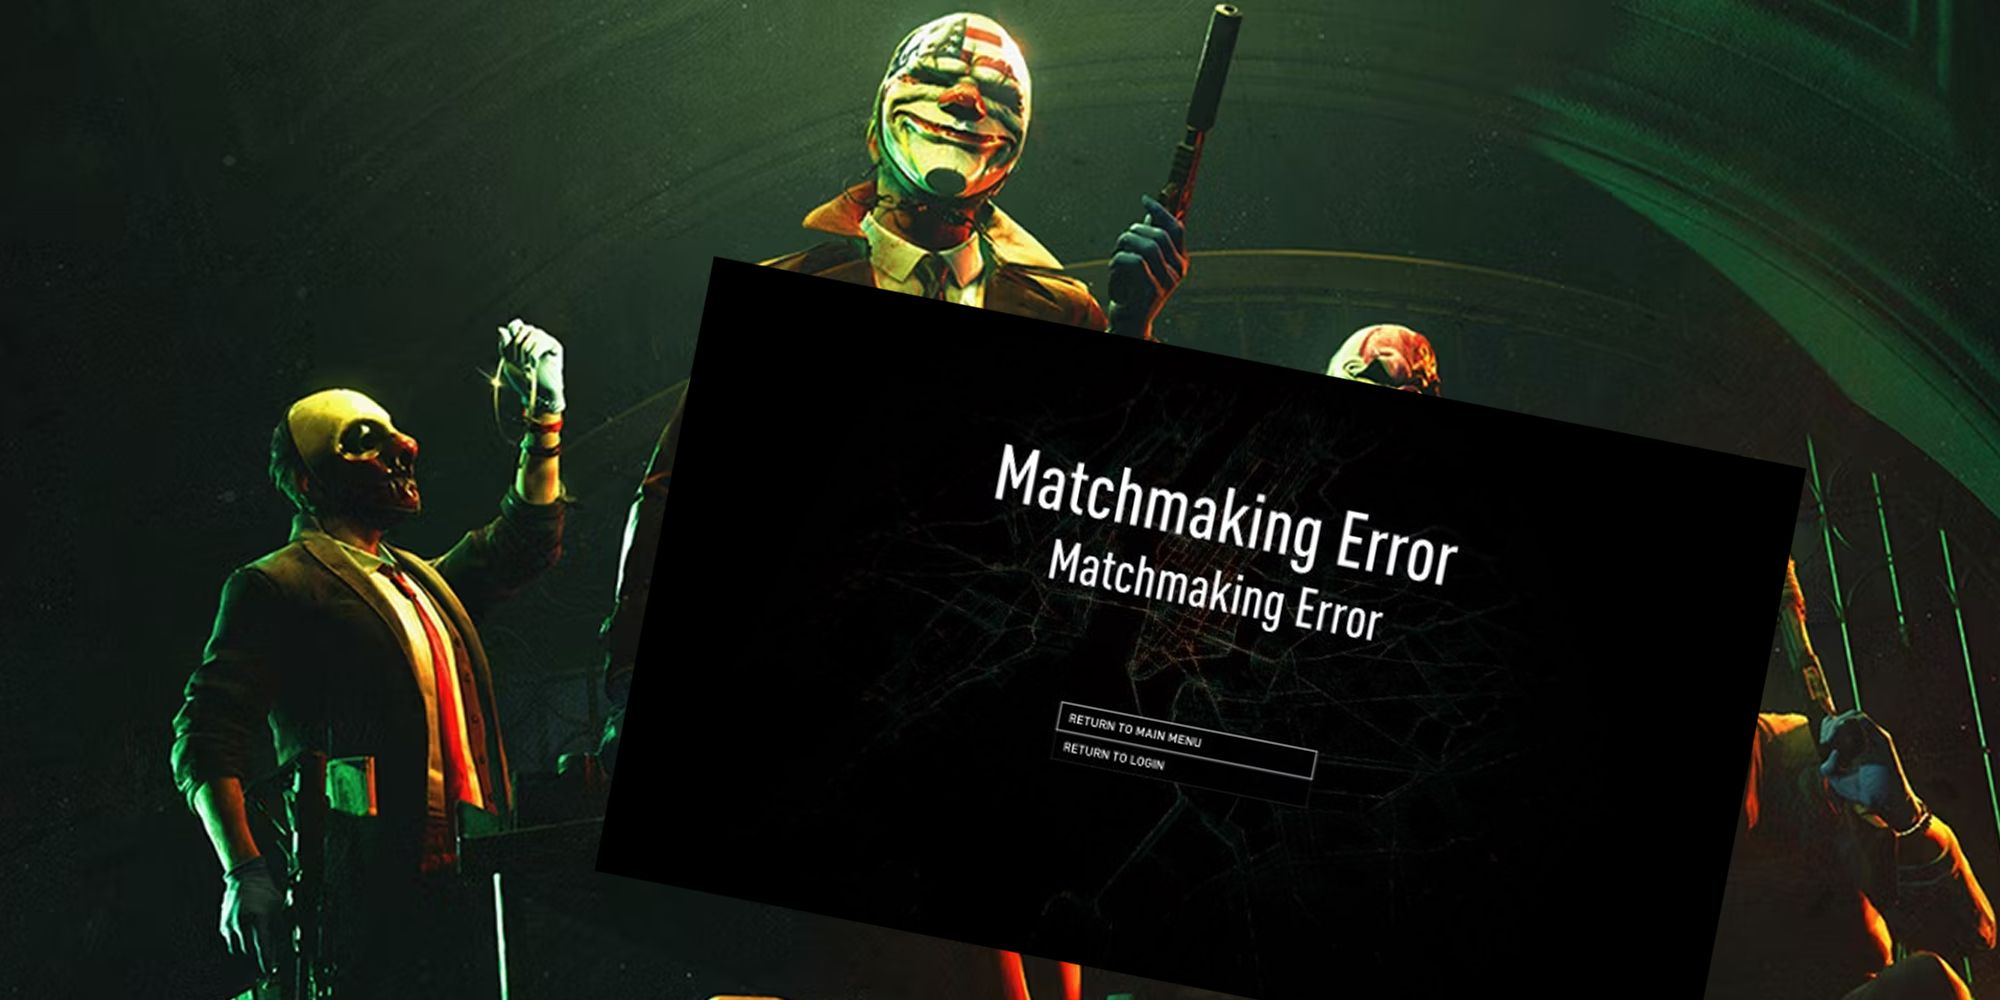 Payday 3 Servers Down September 24 - Matchmaking Errors (Update 3